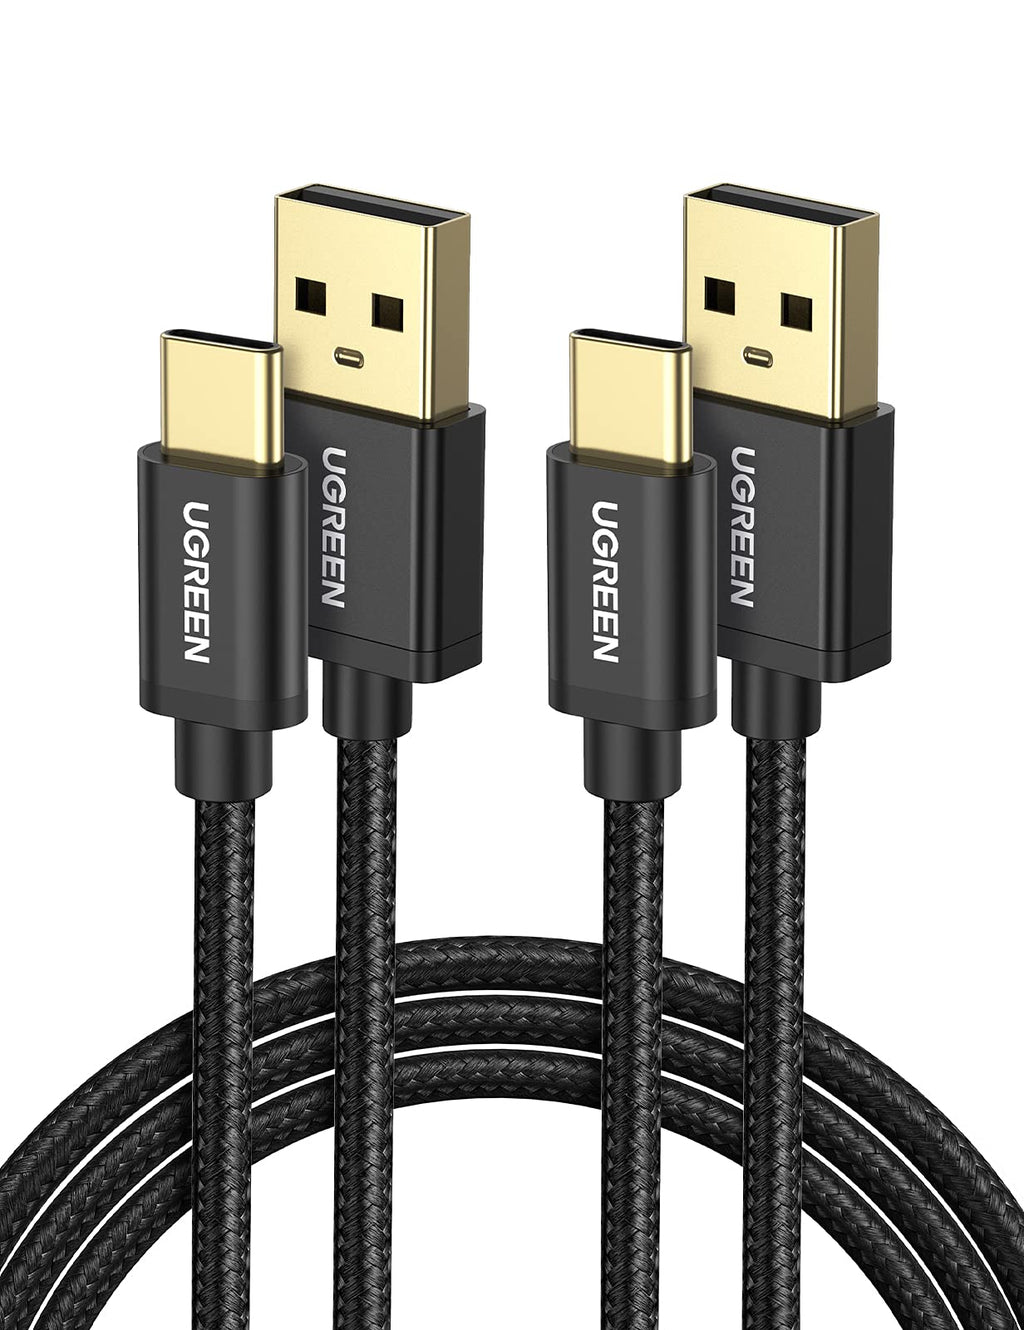 UGREEN USB C Cable 2 Pack 3A Fast Charge - 6FT QC3.0 Durable Nylon Braided USB A to USB C Charger Cable Compatible with Samsung Galaxy S21 S20 Z Flip 3 Z Fold Note 20 LG V50 Pixel iPad Mini 6 PS5 - LeoForward Australia